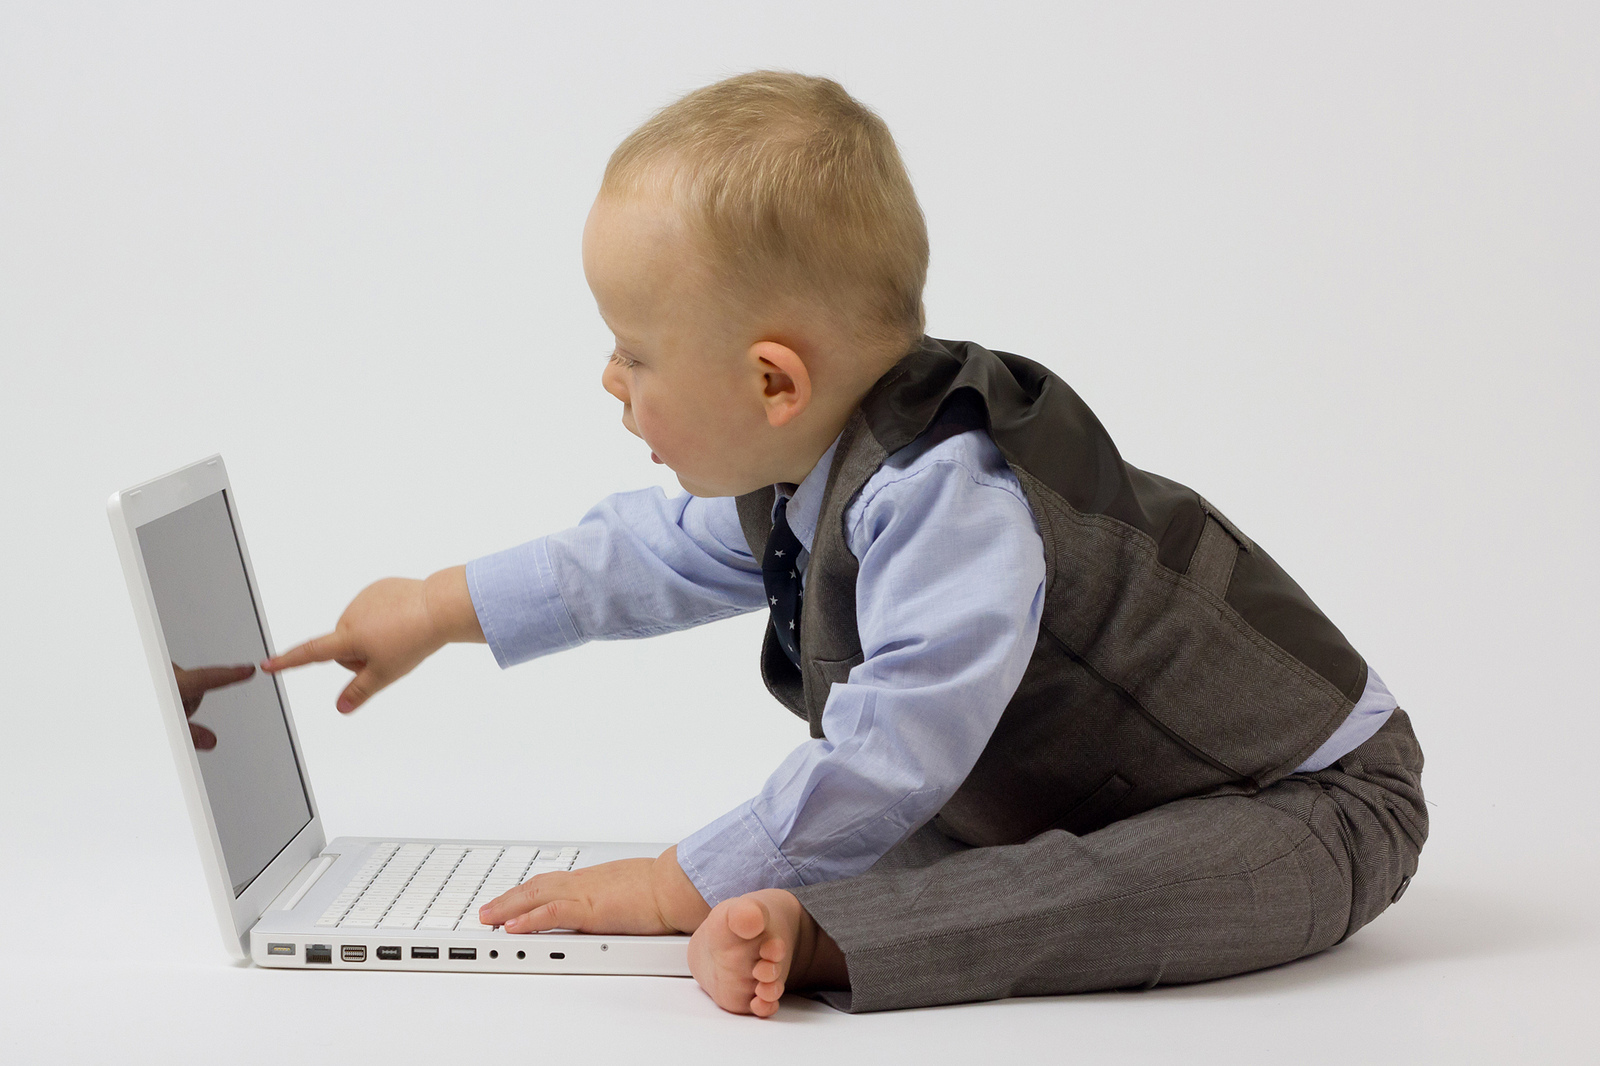 A baby in business attire pointing at a laptop, published to "3 Tips for Creating Great Content Marketing Collateral"